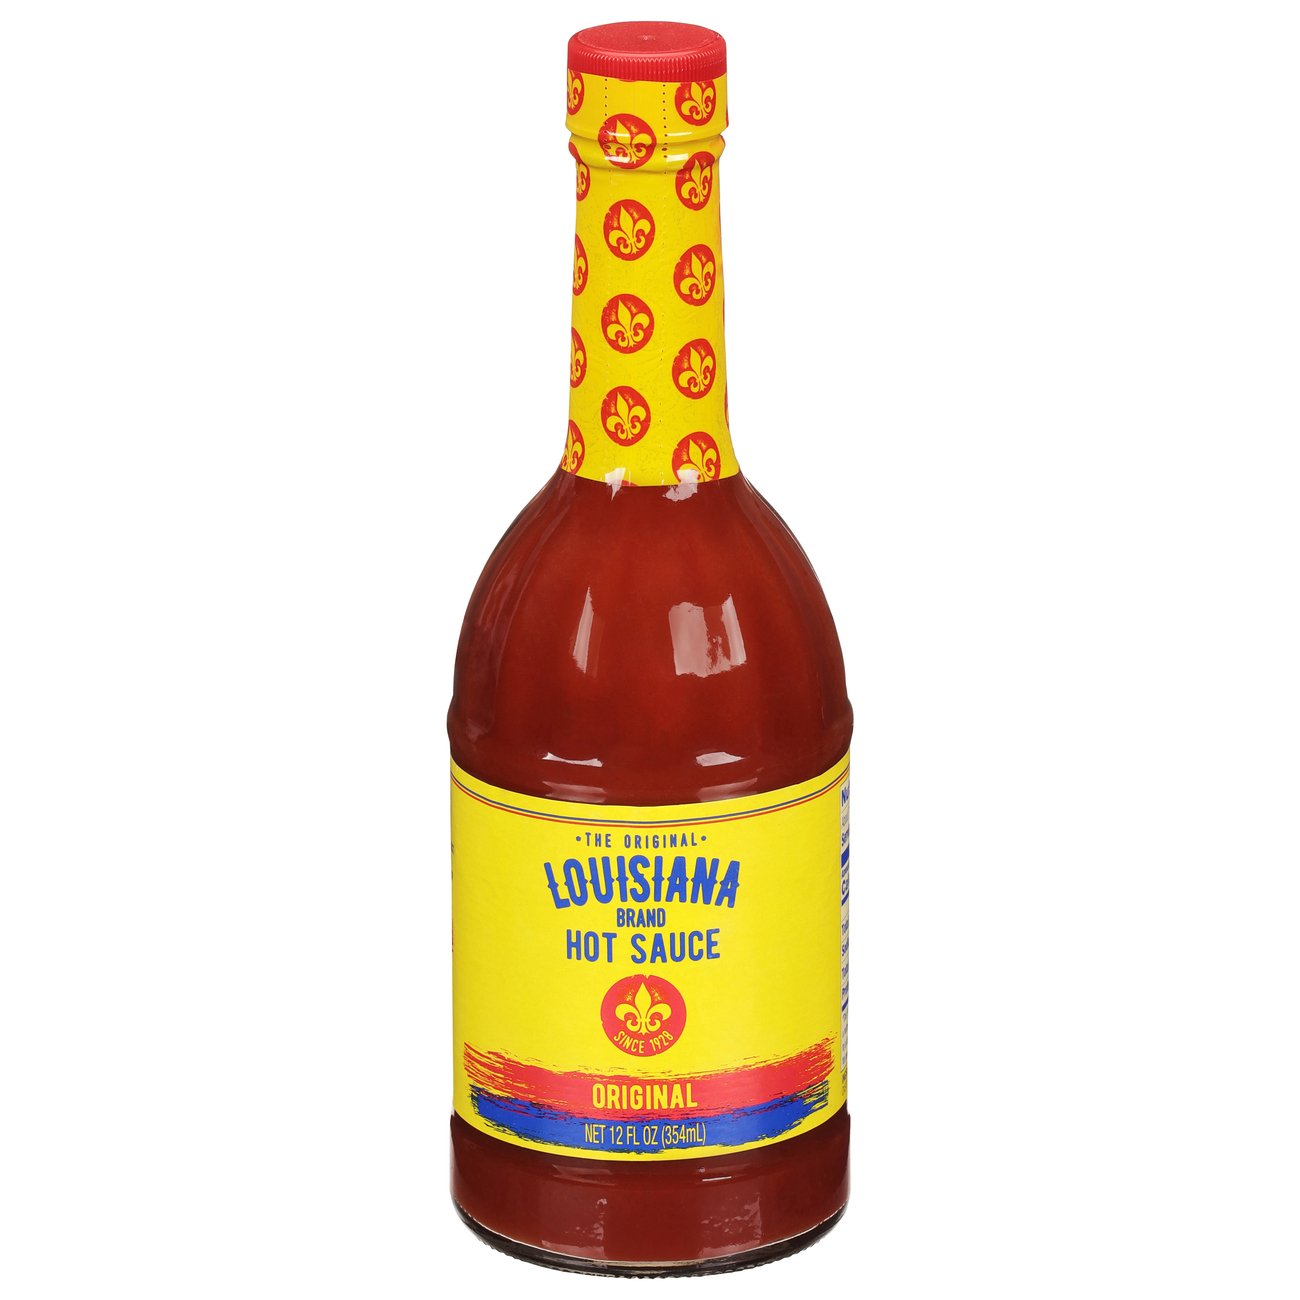 Louisiana Supreme Pepper Sauce with Tabasco Peppers